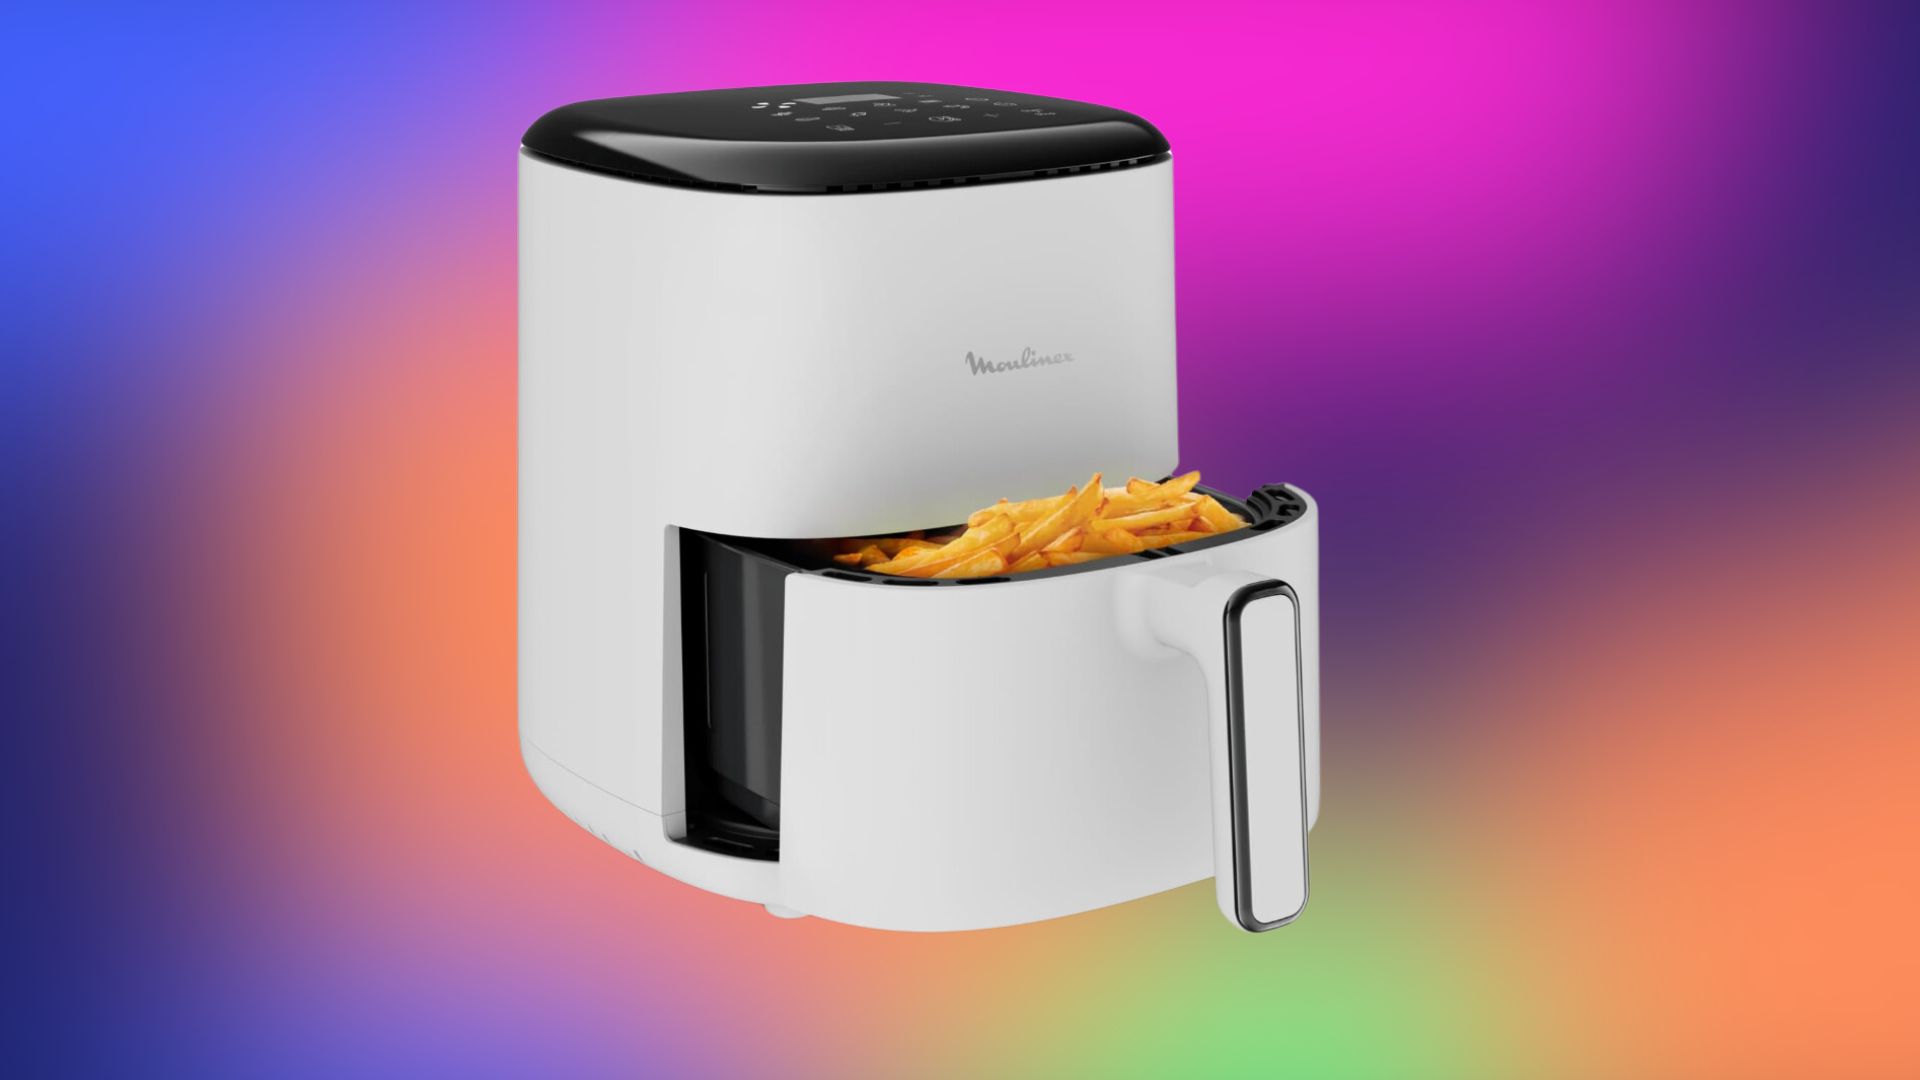 At 50% Off, This Moulinex Air Fryer Is a Great Alternative to the Xiaomi Model